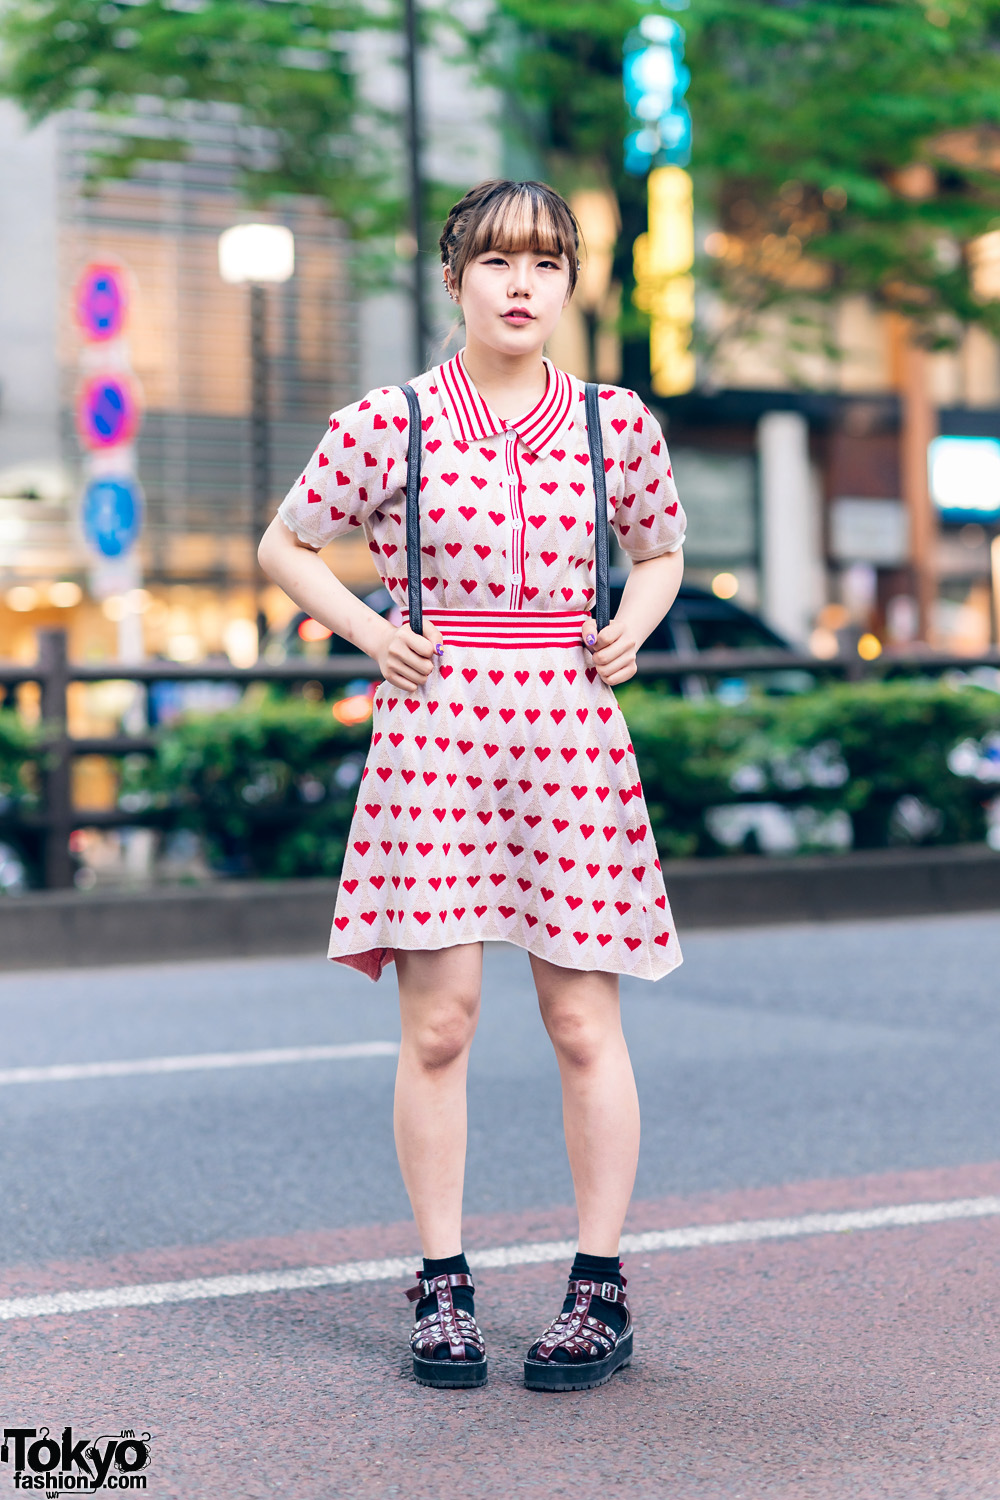 Harajuku Street Style w/ Braided Hairstyle, Vivienne Westwood Ear Studs, Kobinai Heart Print Dress, Quilted Backpack & Merry Jenny Strap Shoes